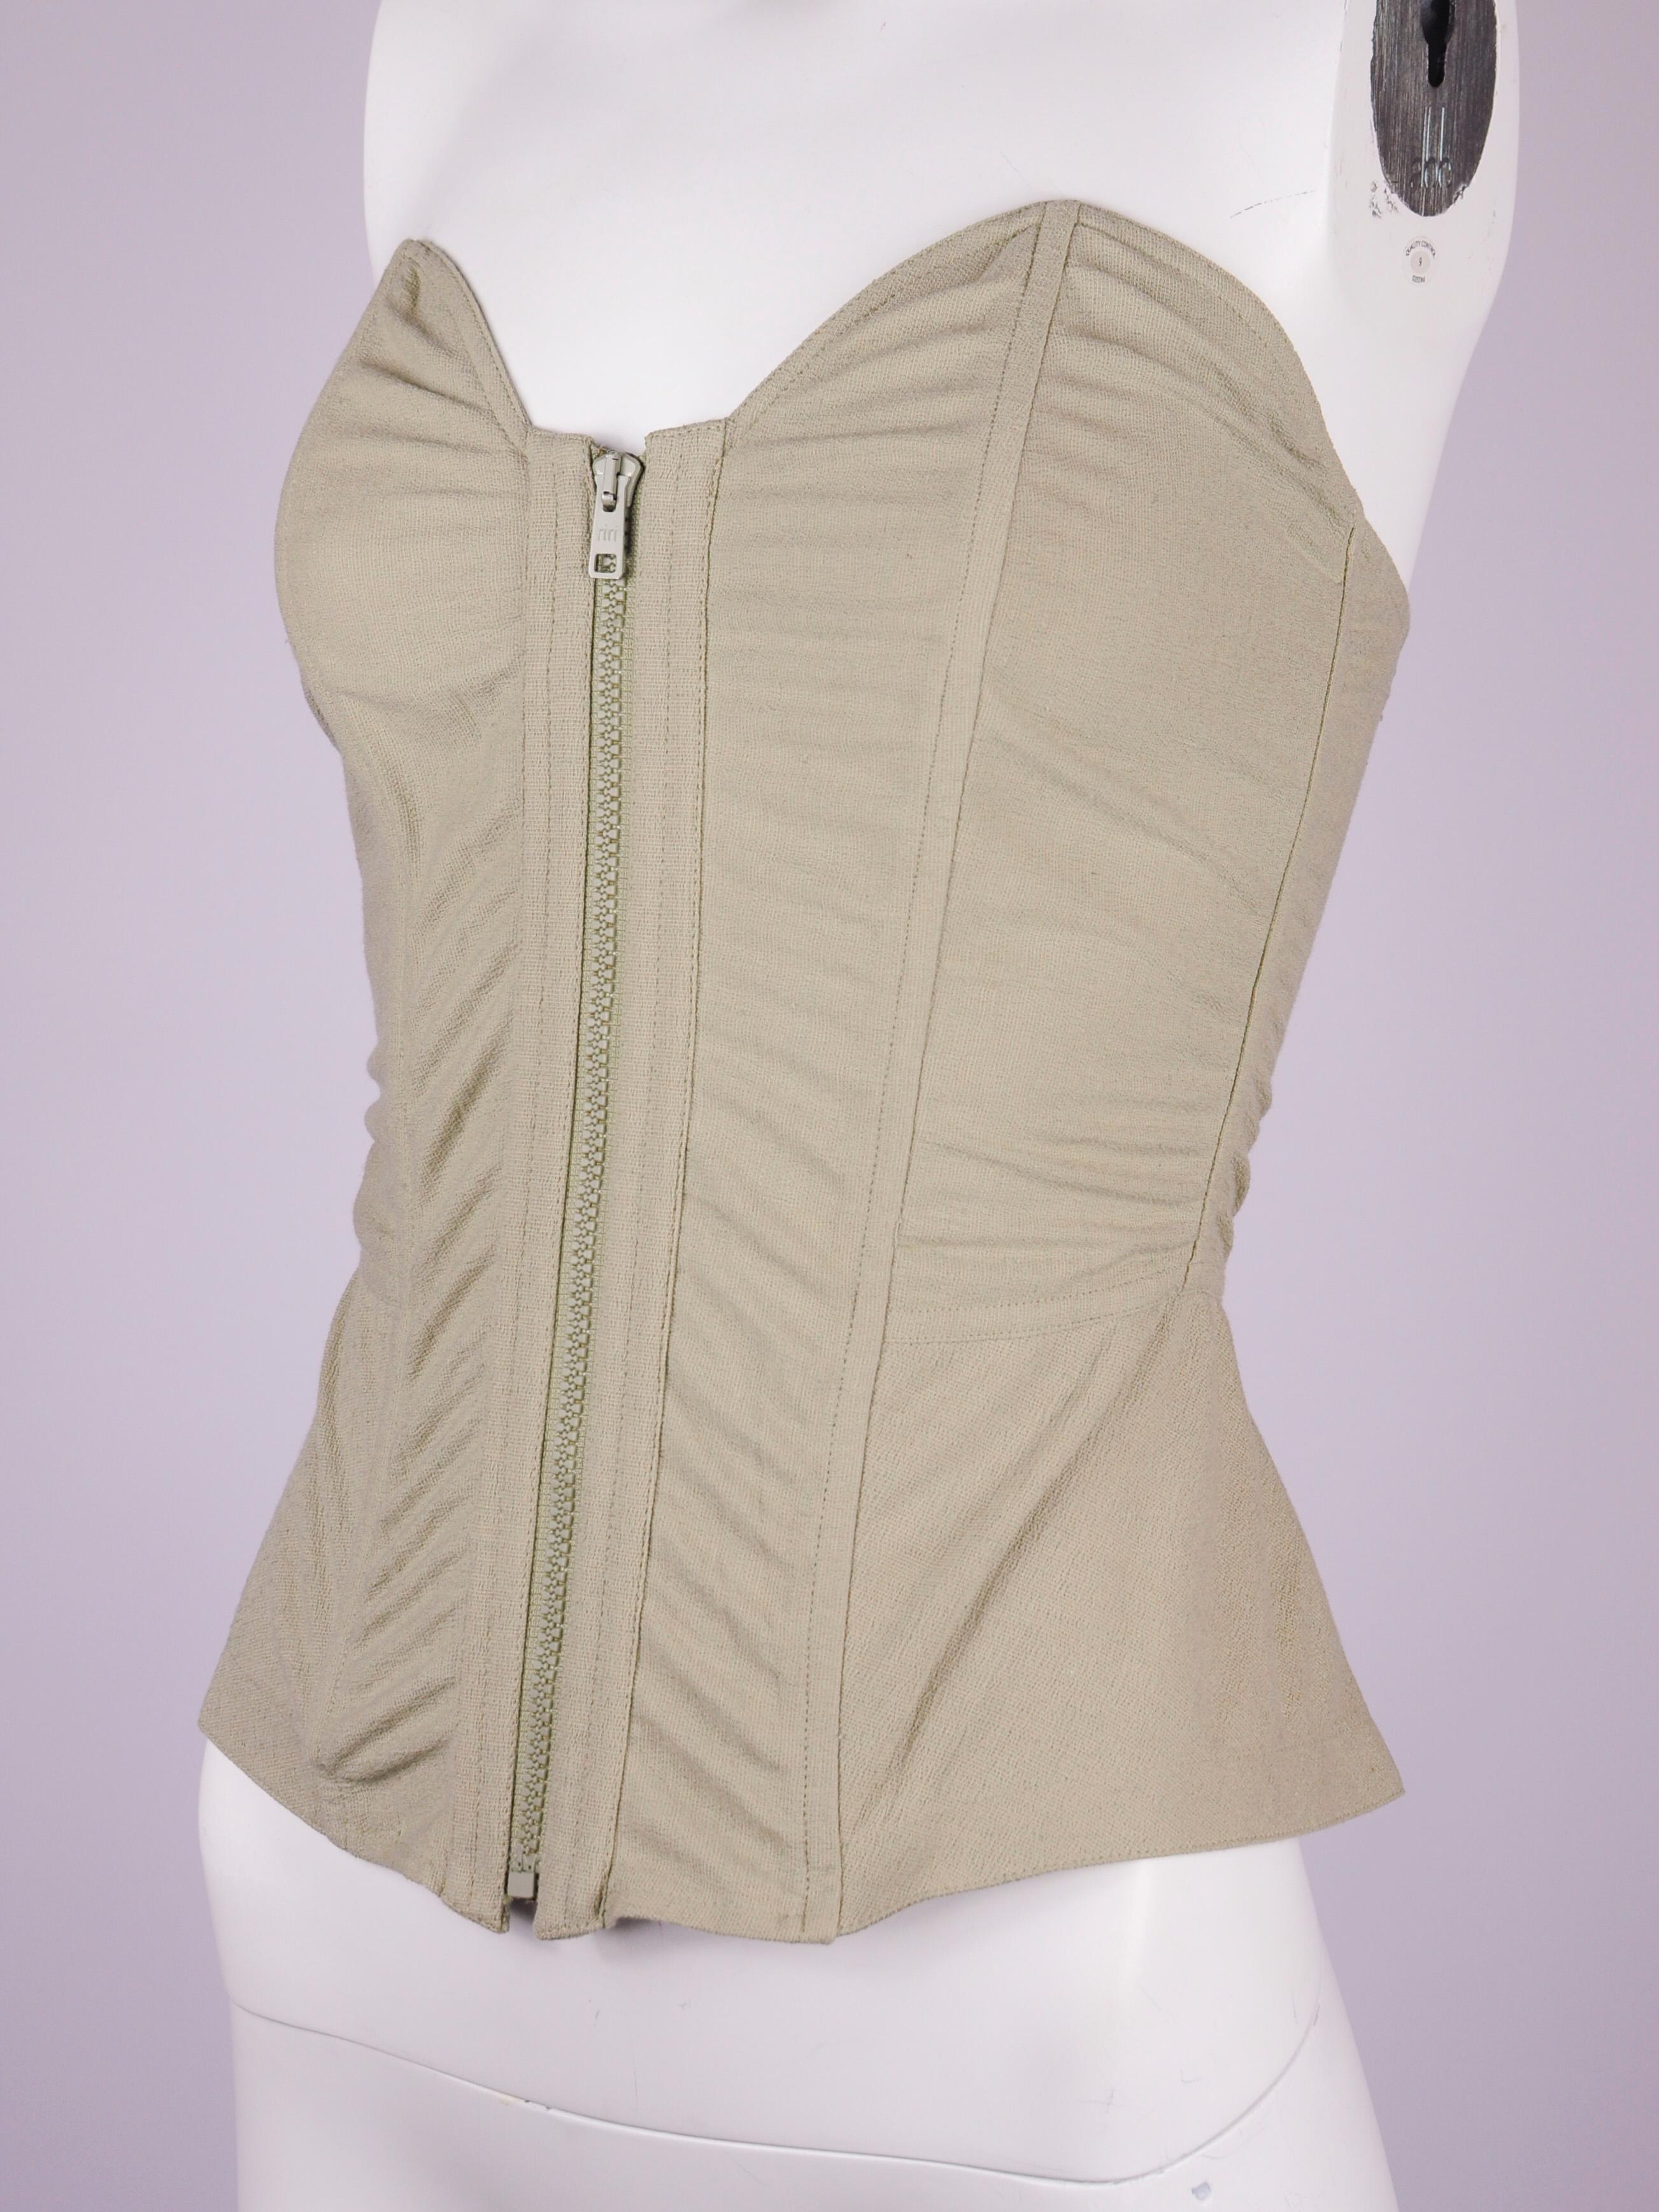 La Perla corset top in beige linen and cotton blend  from the early 1990s. This La Perla corset is deadstock, meaning it is new with tags and has never been worn before. It is reinforced with boning. The zipper opens all the way so it’s easy to put